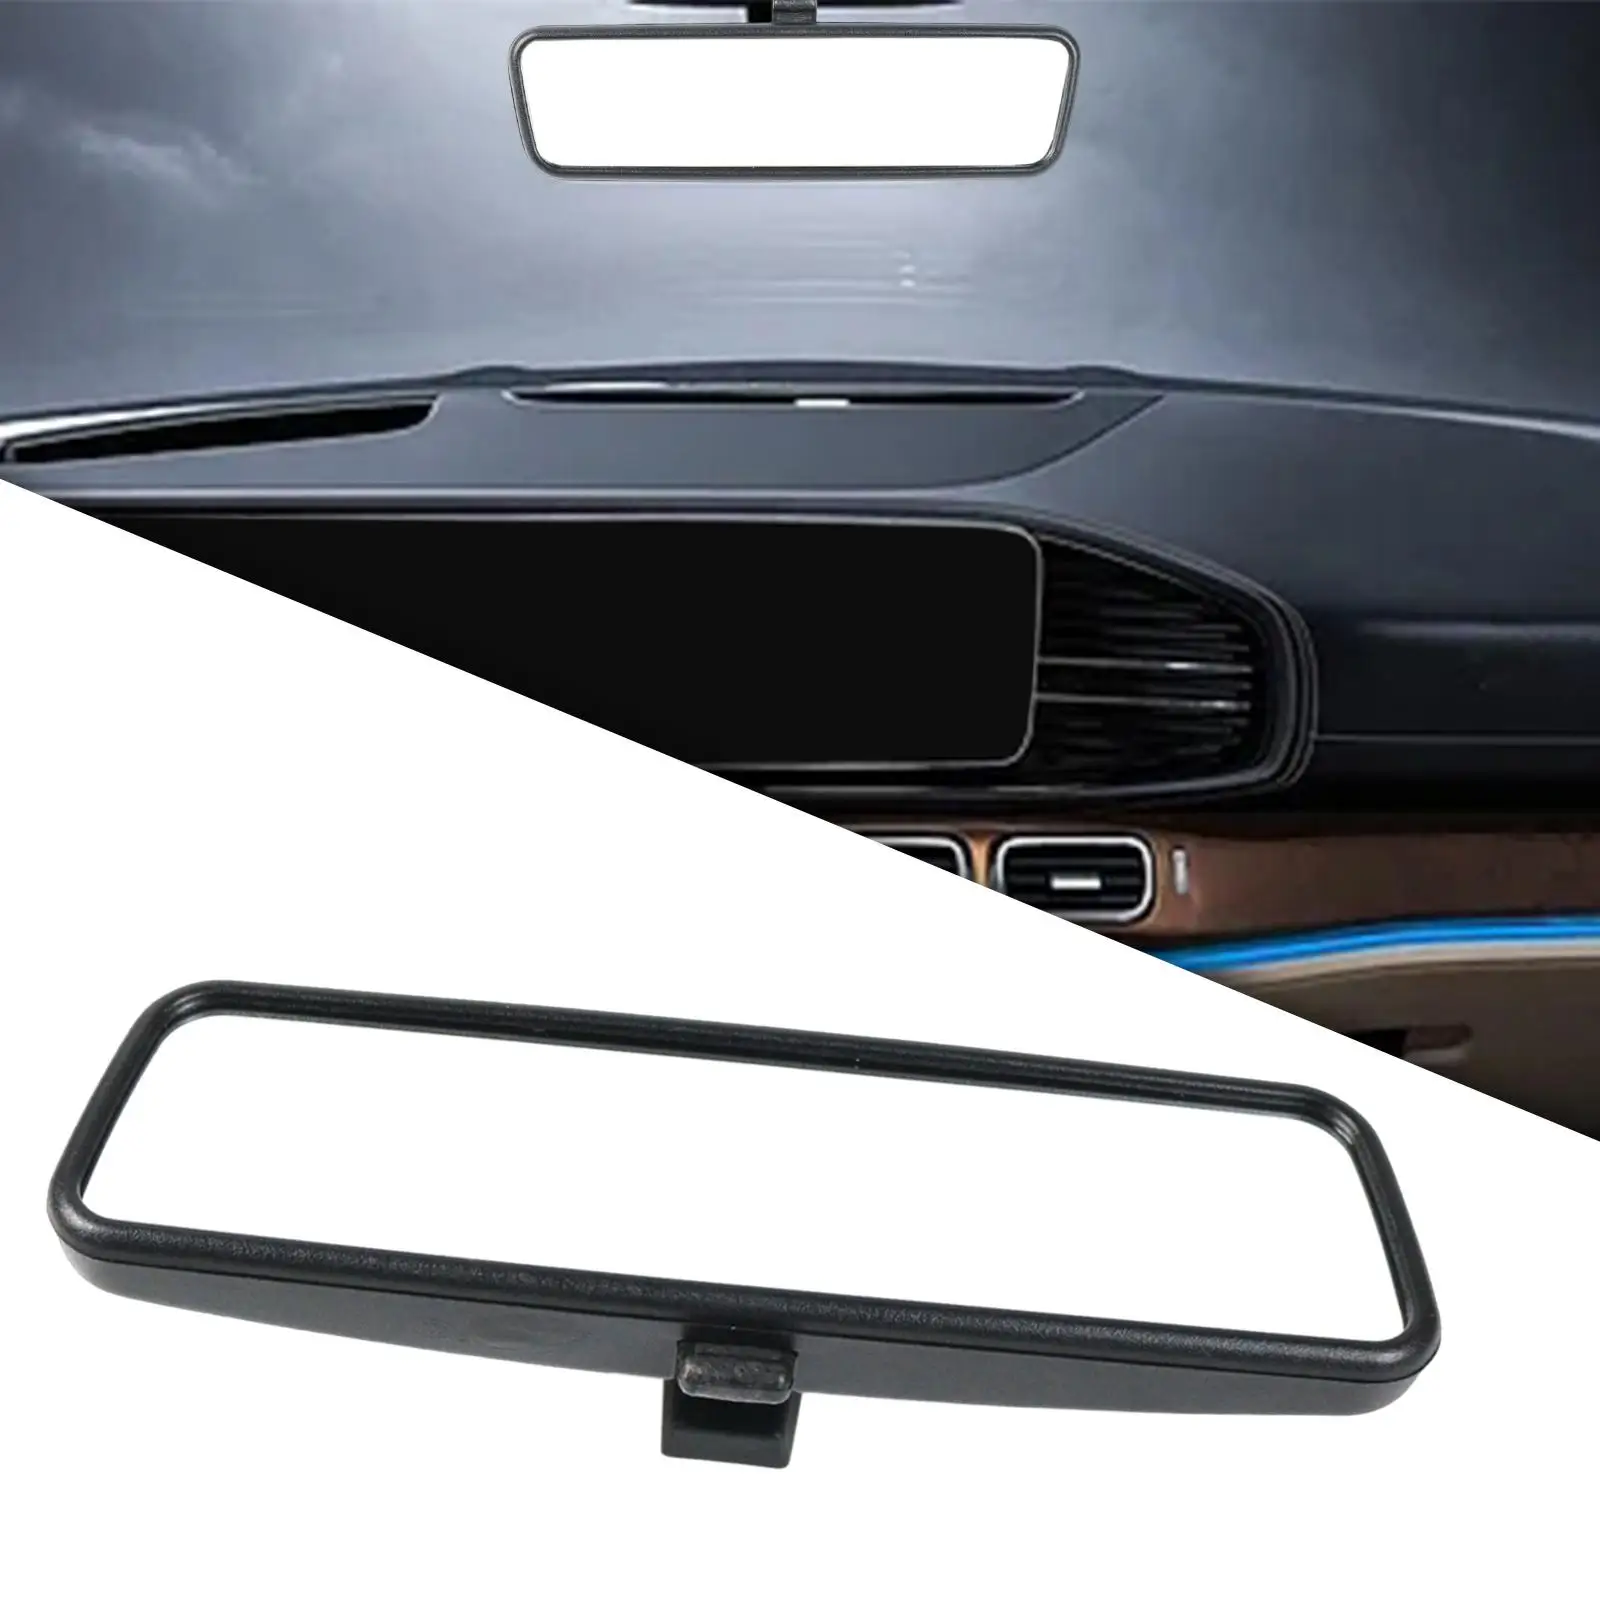 Interior Rear View Mirror 814842 Rearview Mirror for Peugeot 107 Accessory Spare Parts Replacement Easy to Install